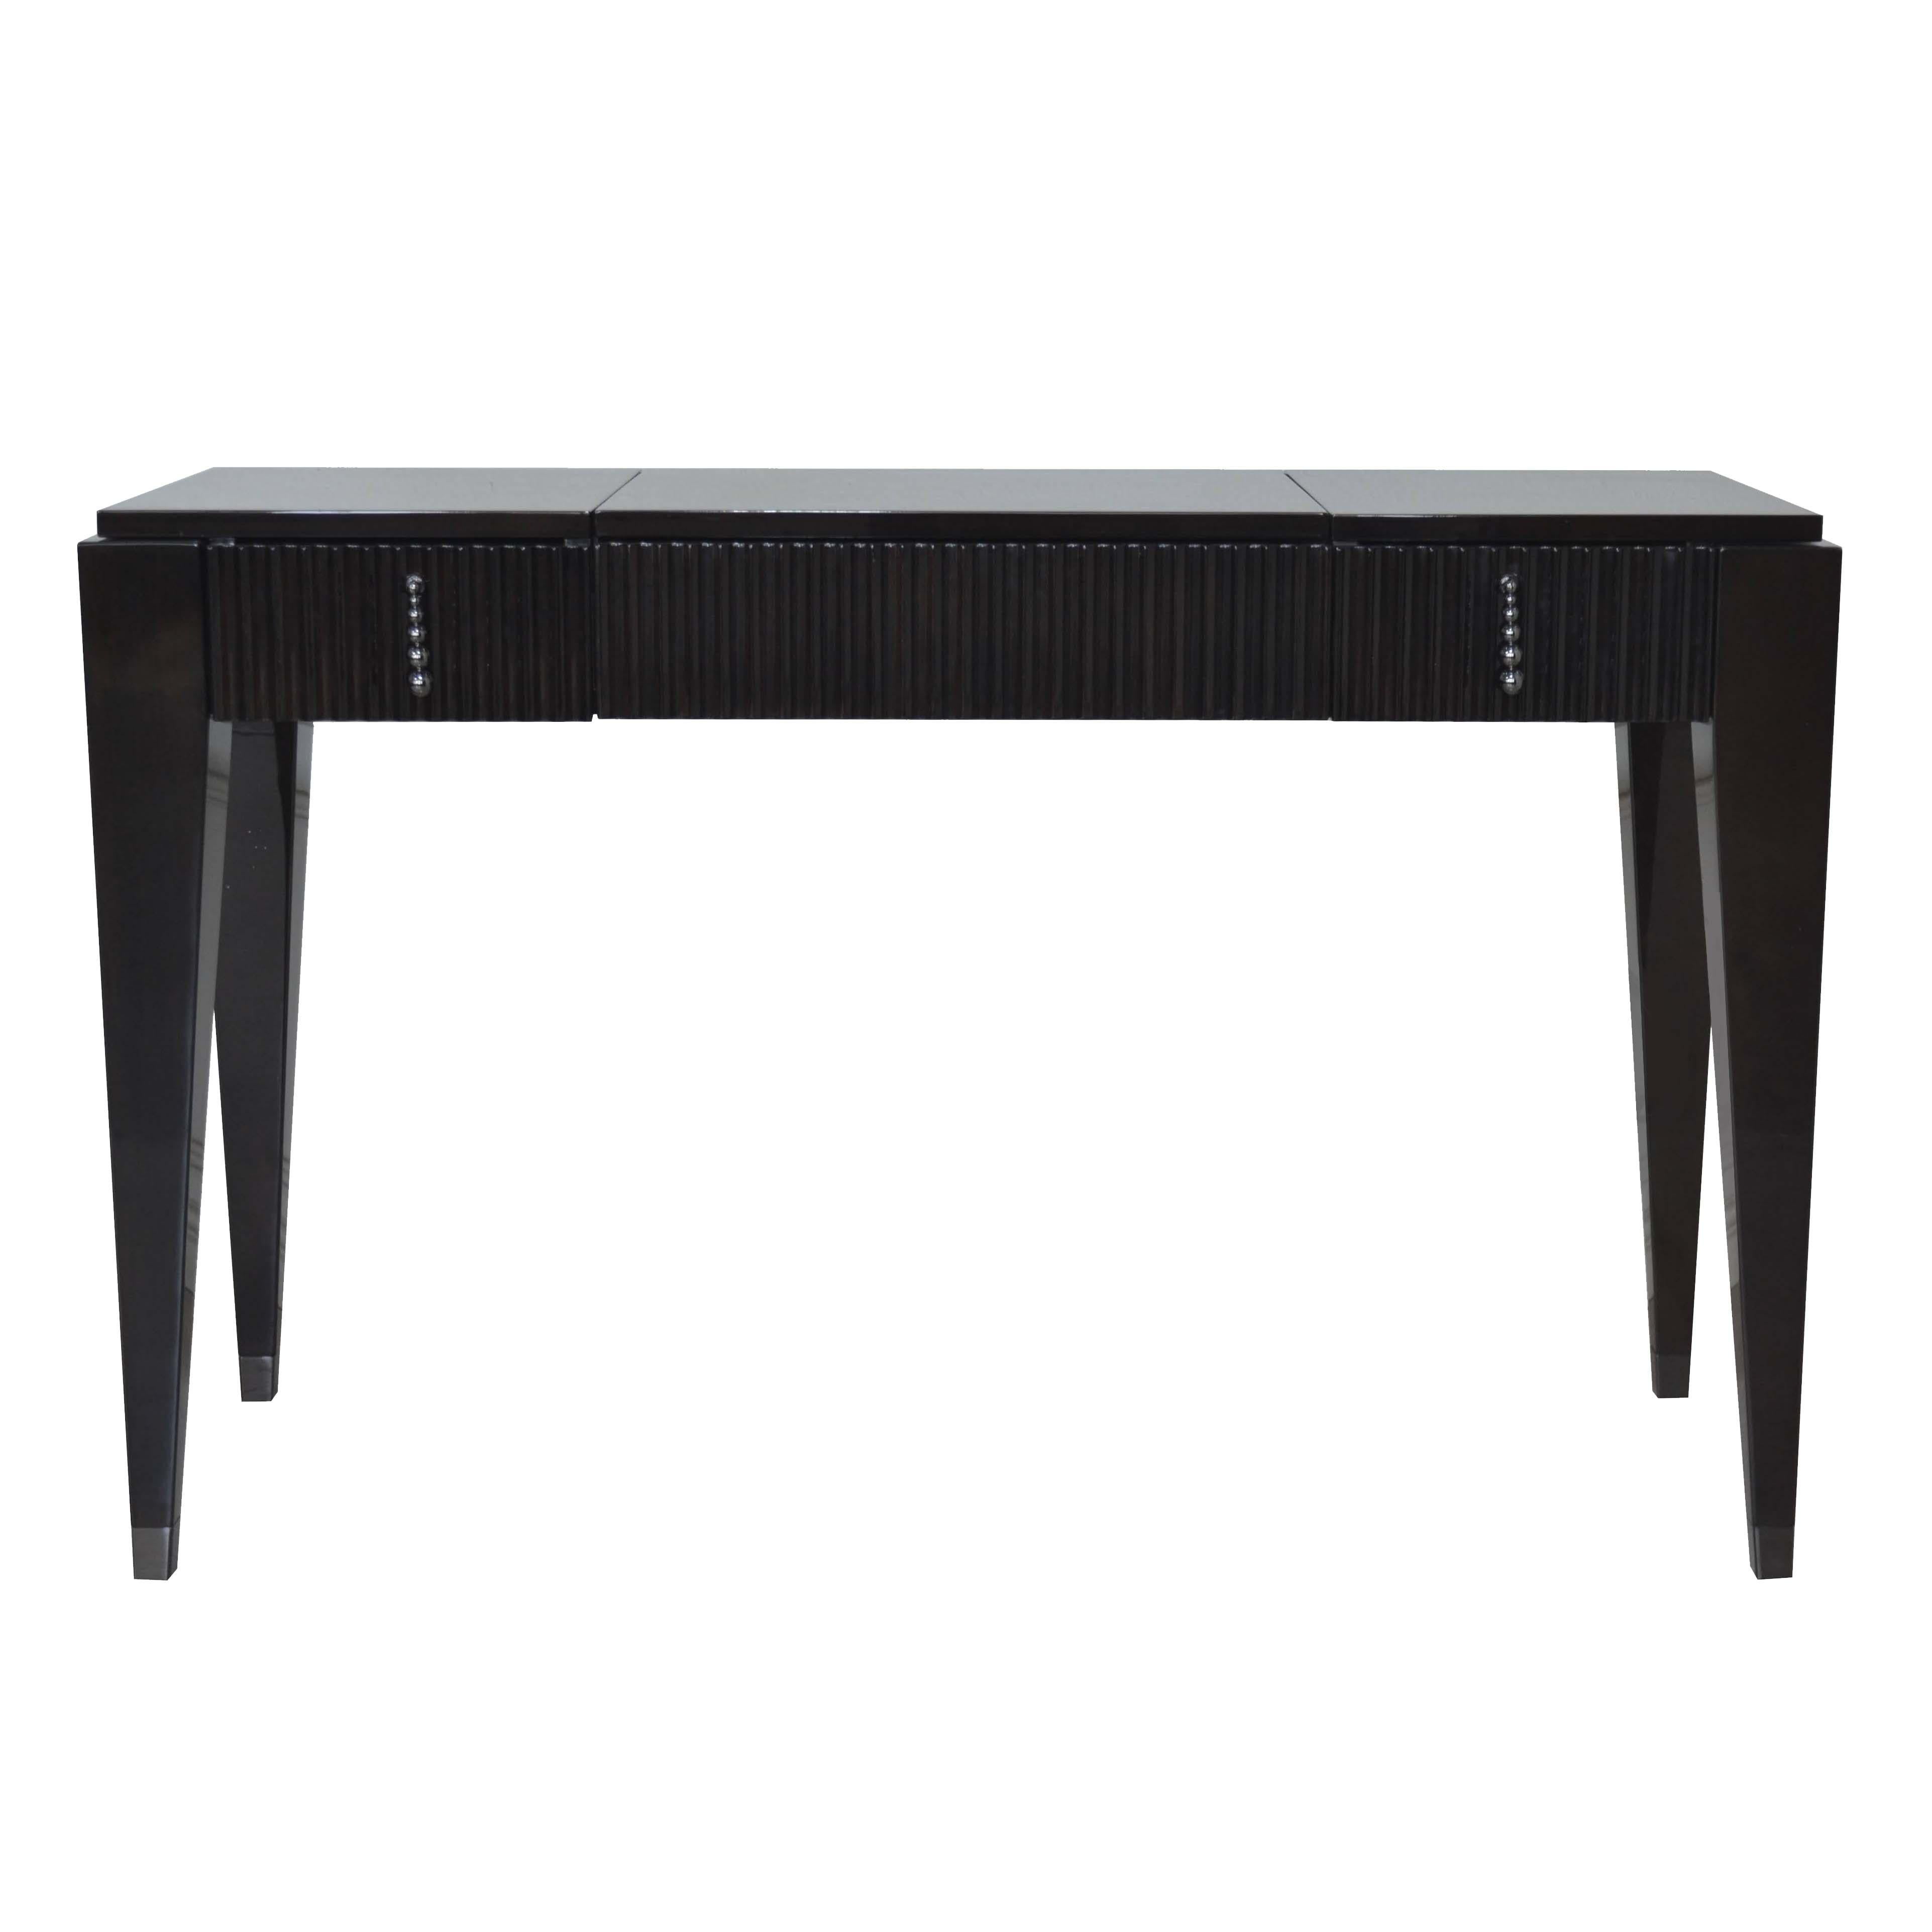 Italian Modern Vanity Table in Dark High-Gloss Ebony Finishing with Two Drawers In New Condition For Sale In Concordia Sagittaria, Veneto